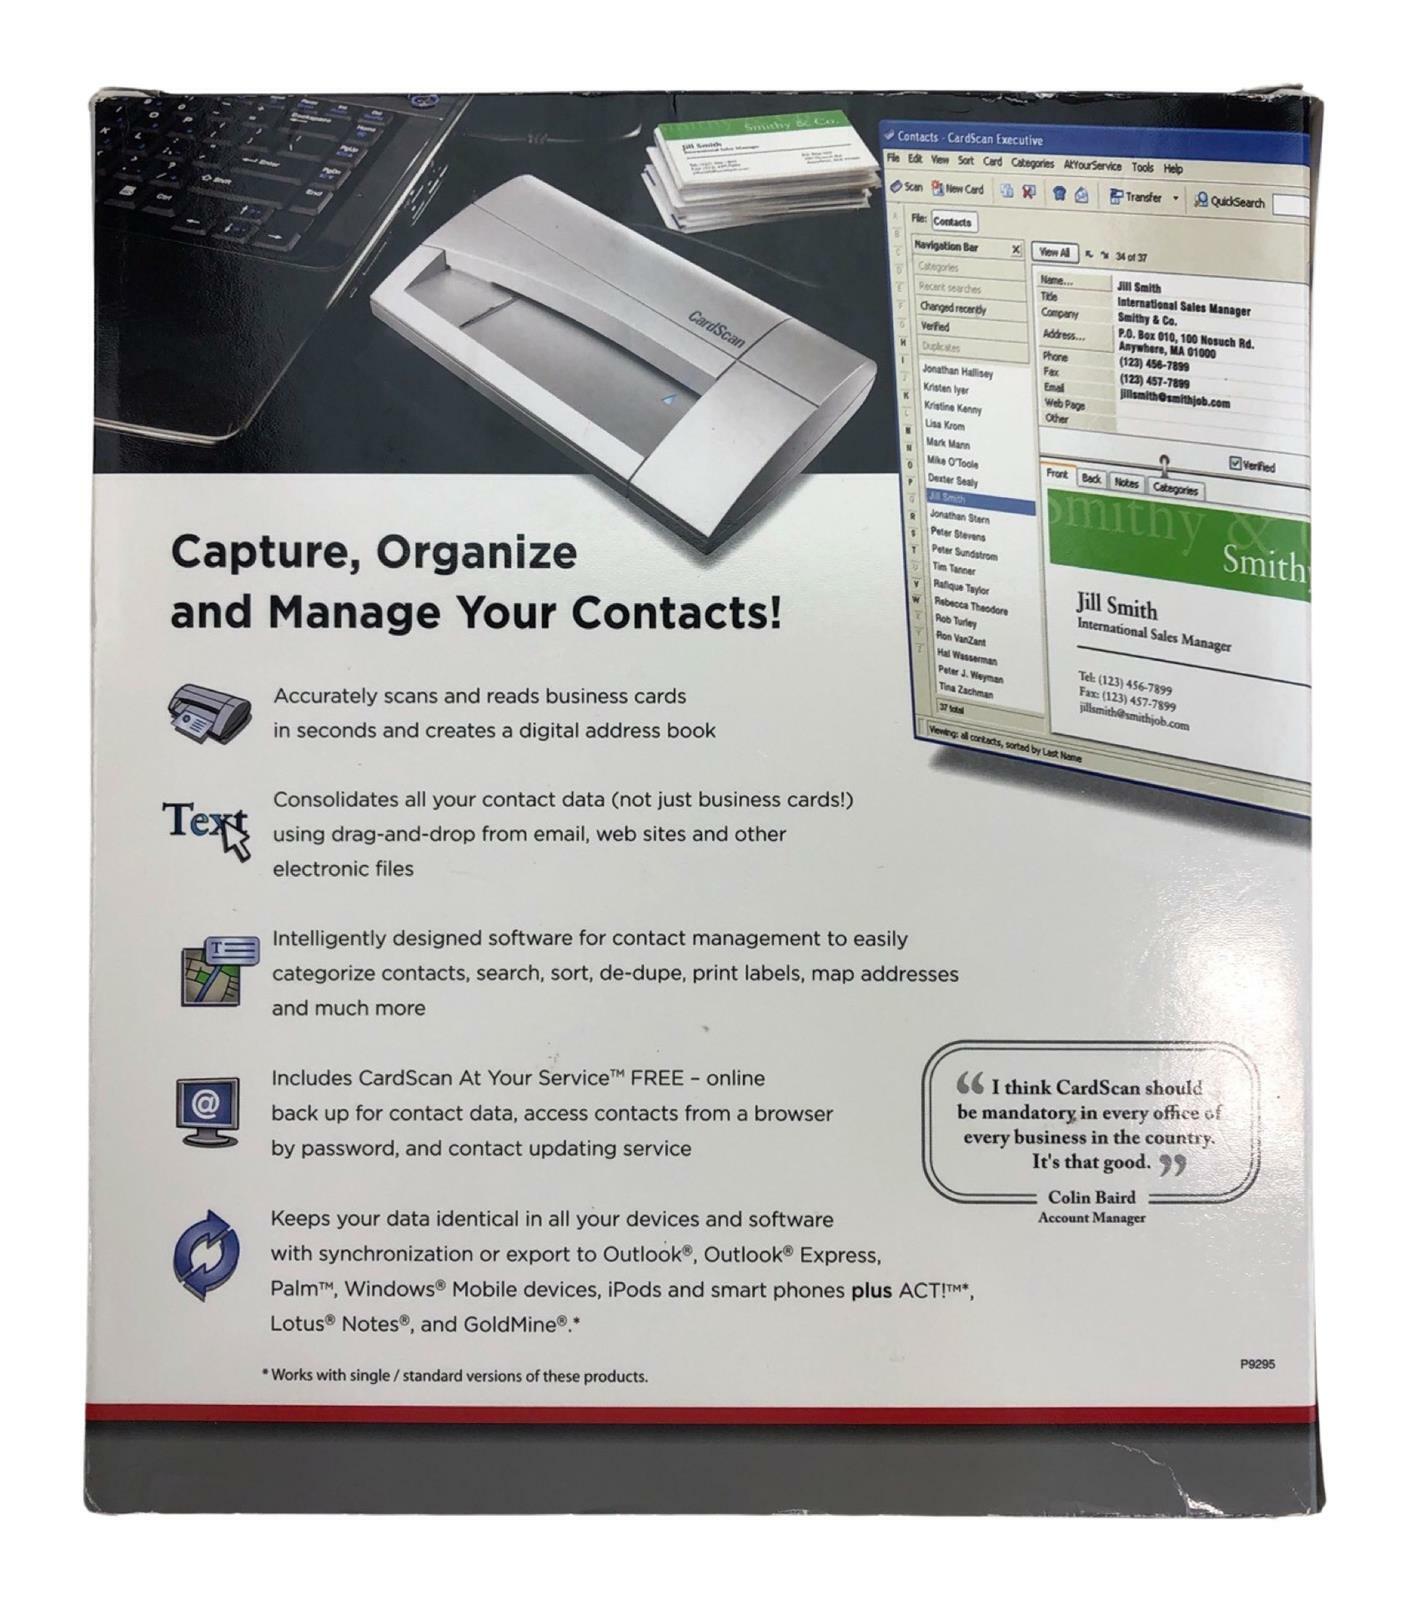 Dymo CardScan Executive 800C Business Card Scanner for PC/Mac